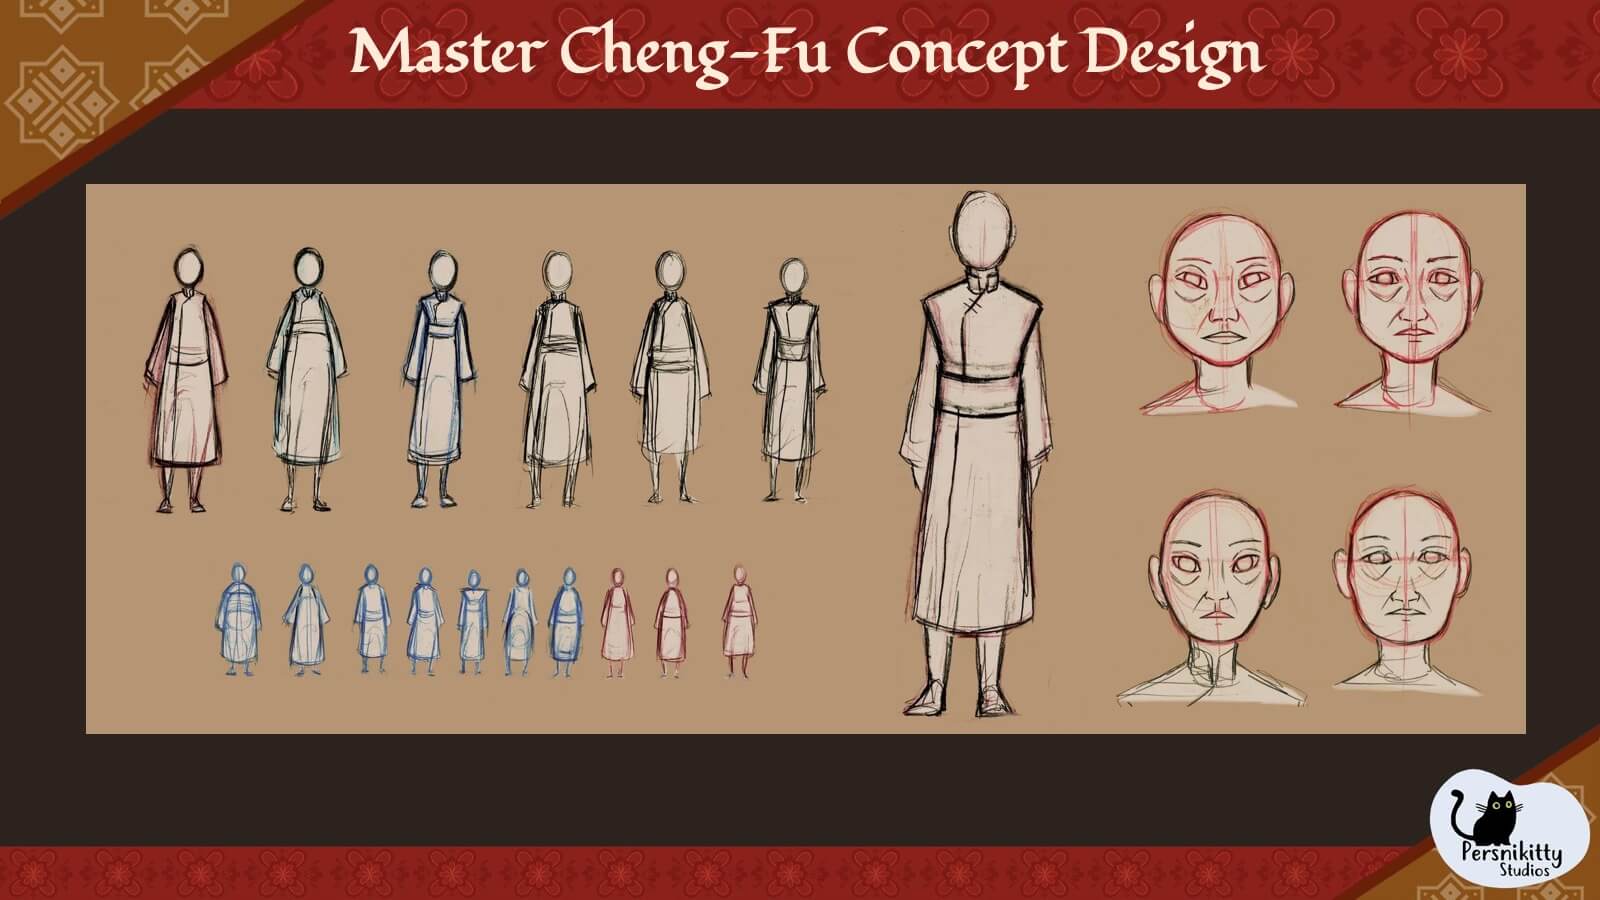 A concept design slide for the character Master Cheng-Fu.